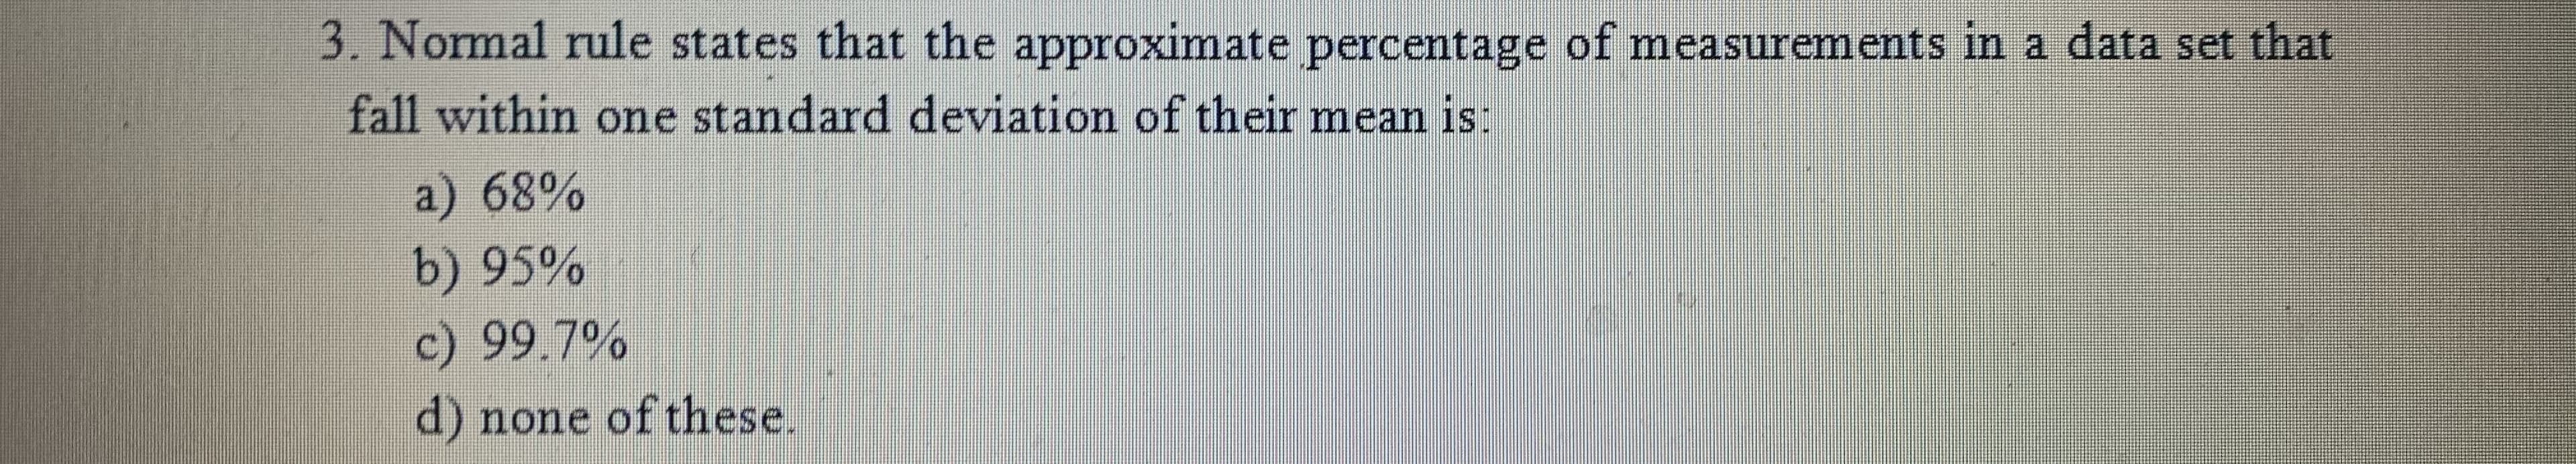 3. Normal rule states that the approximate percentage of measurements in a data set that
fall within one standard deviation of their mean is:
